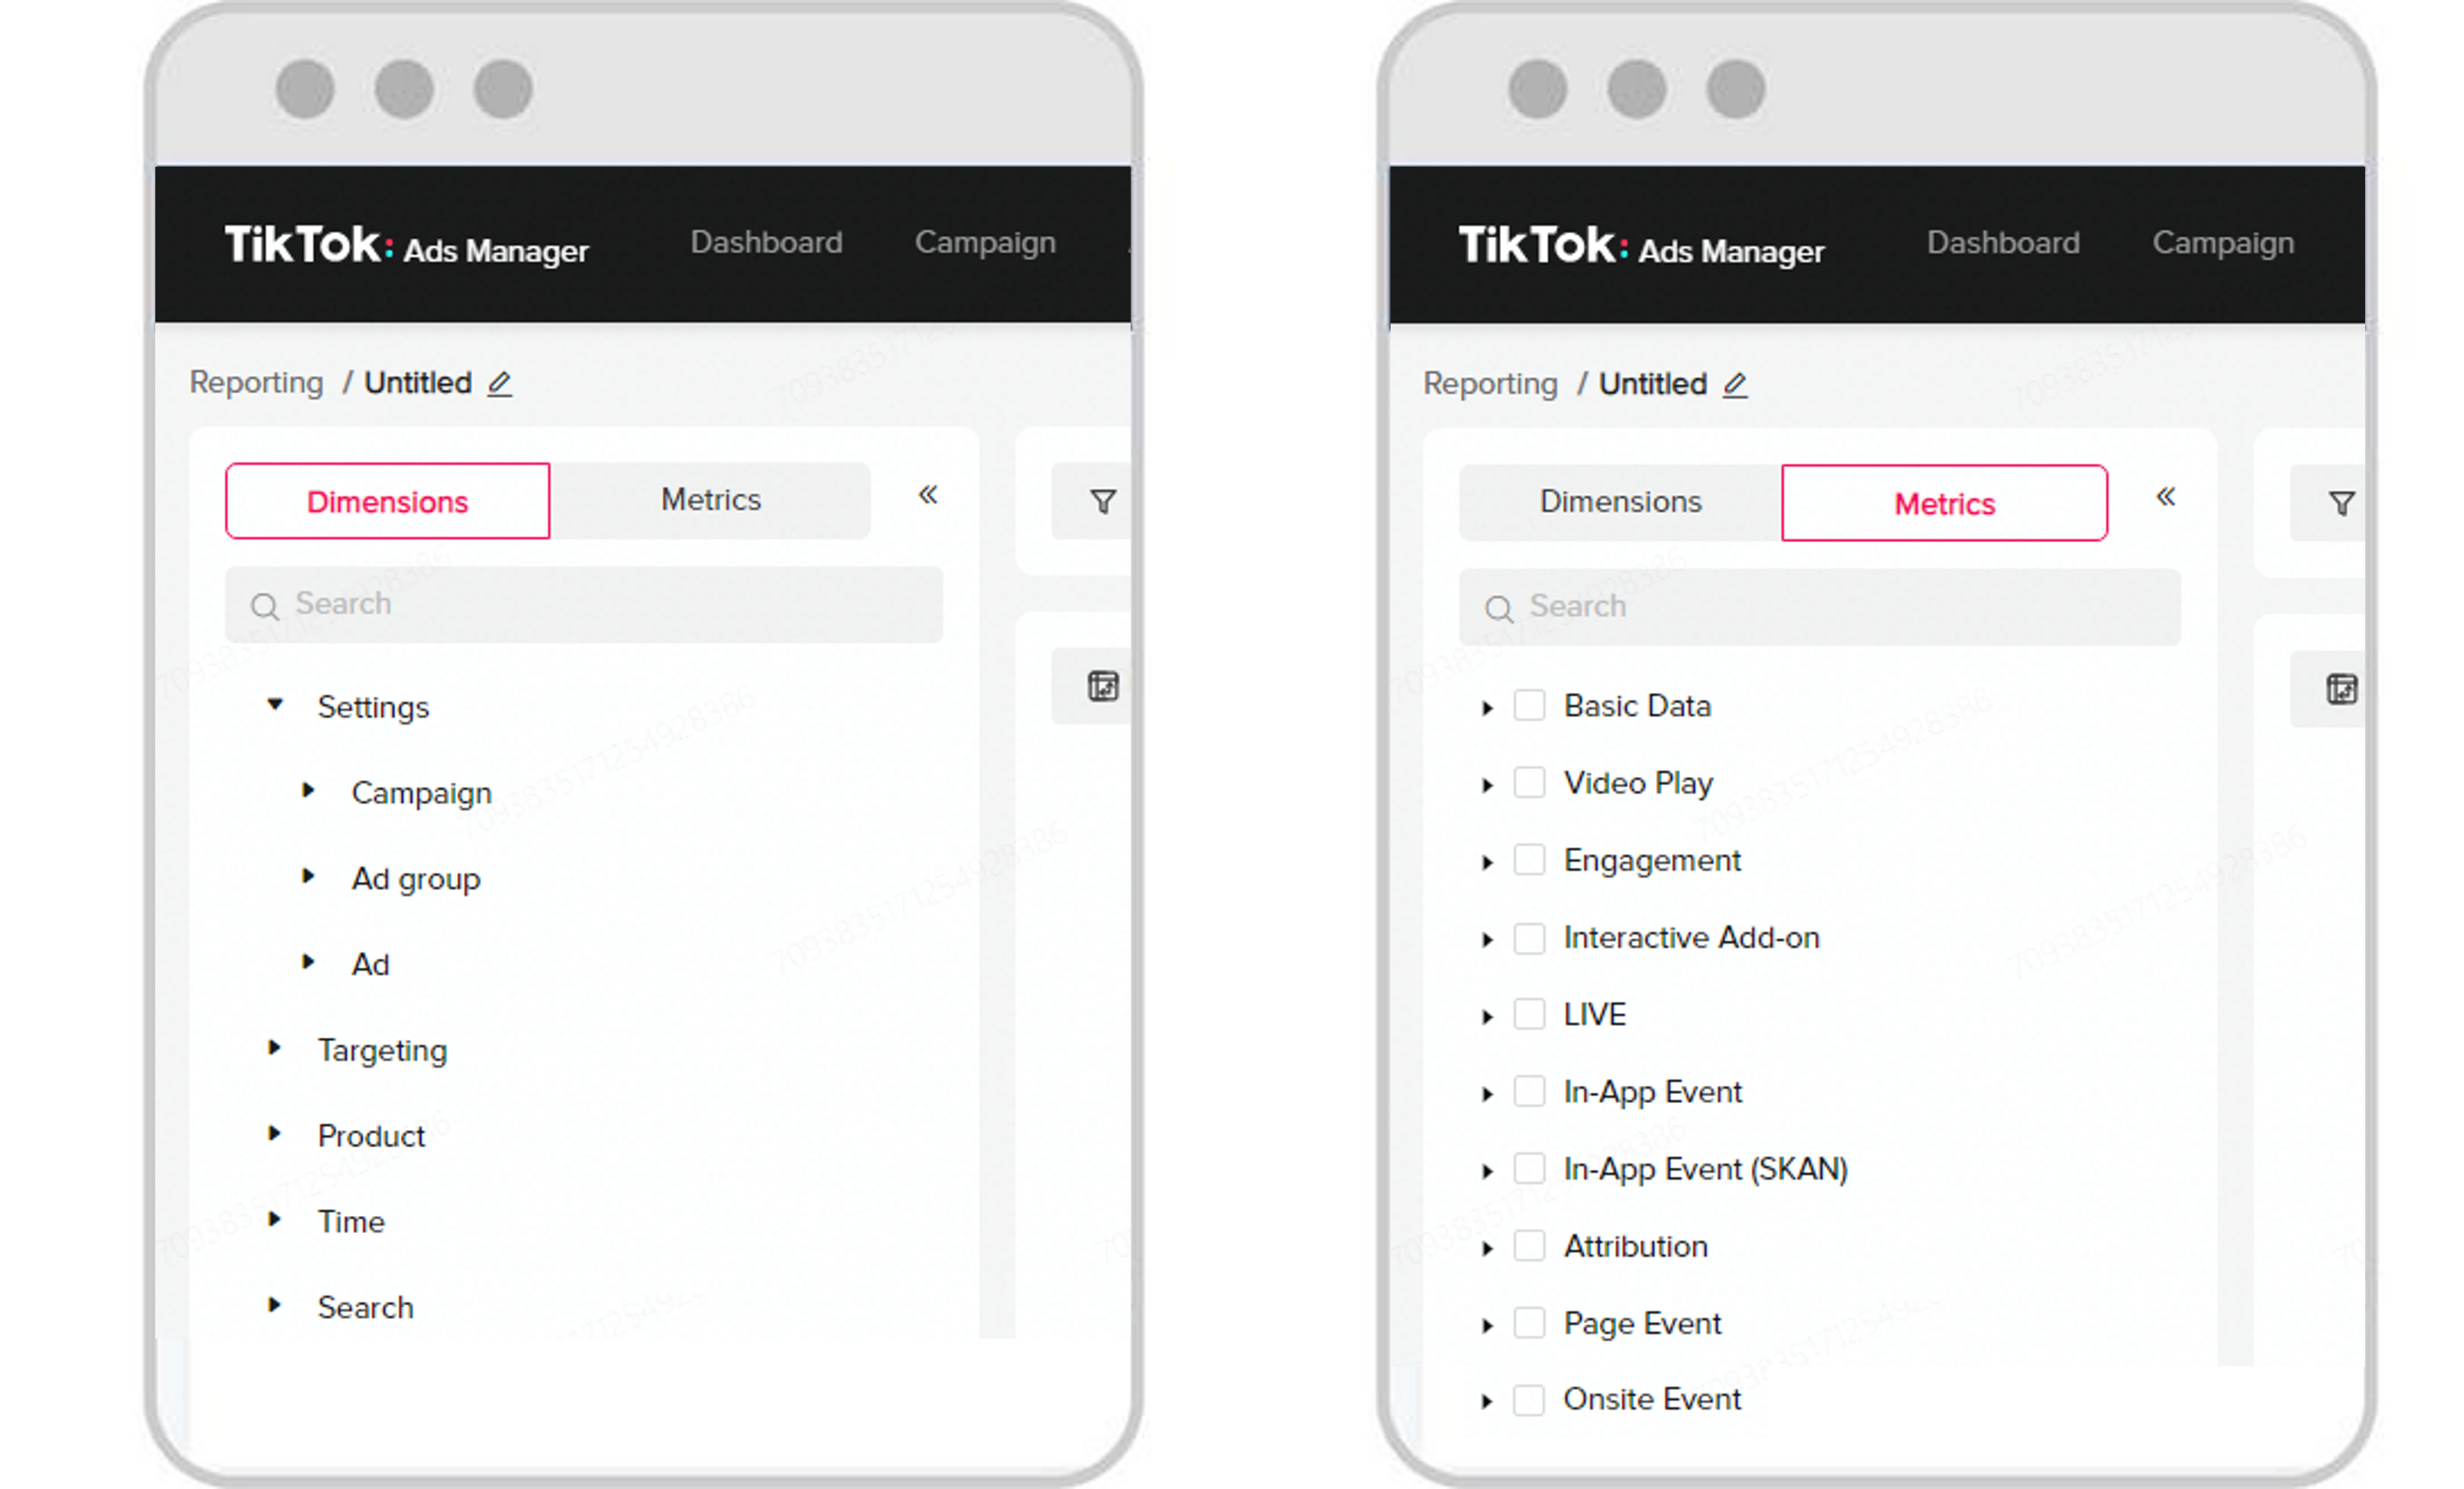 Metrics and dimensions in TIkTok ads dashboard